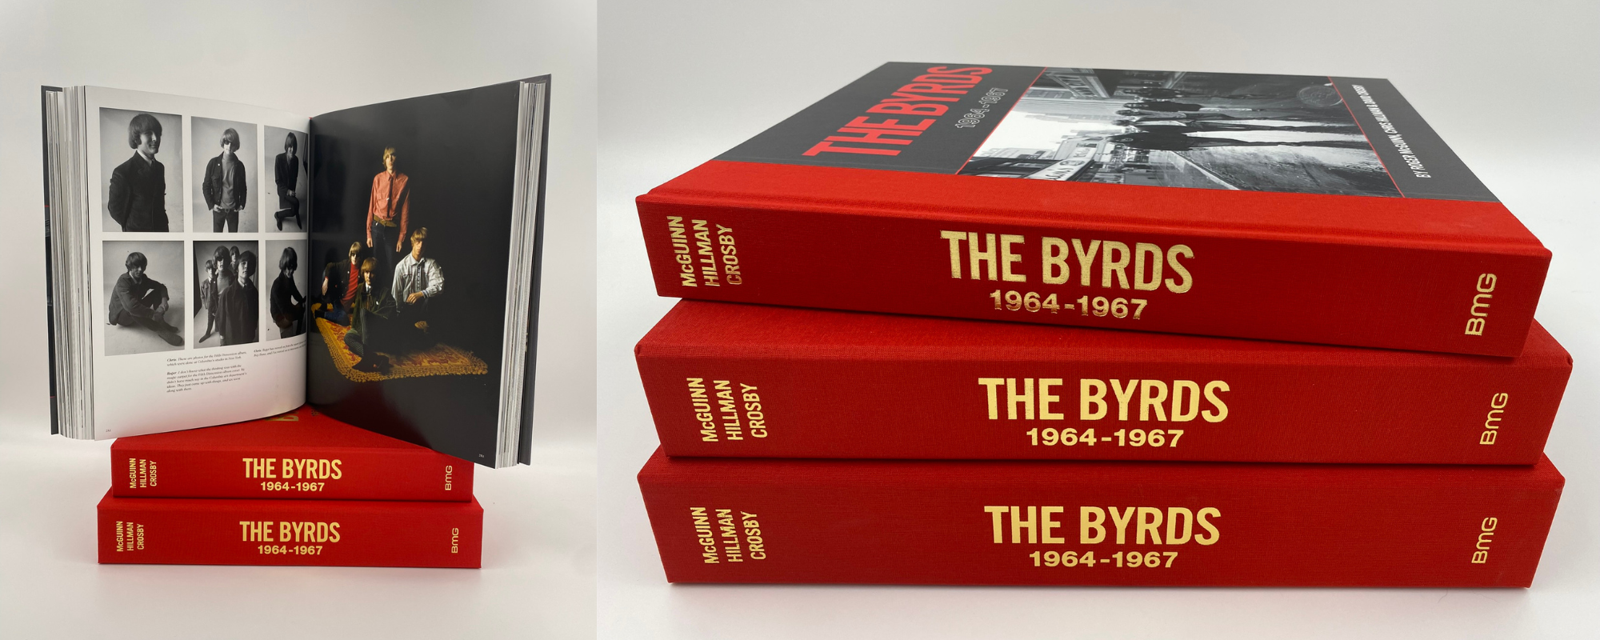 The Byrds: 1964-1967 - BMG Books